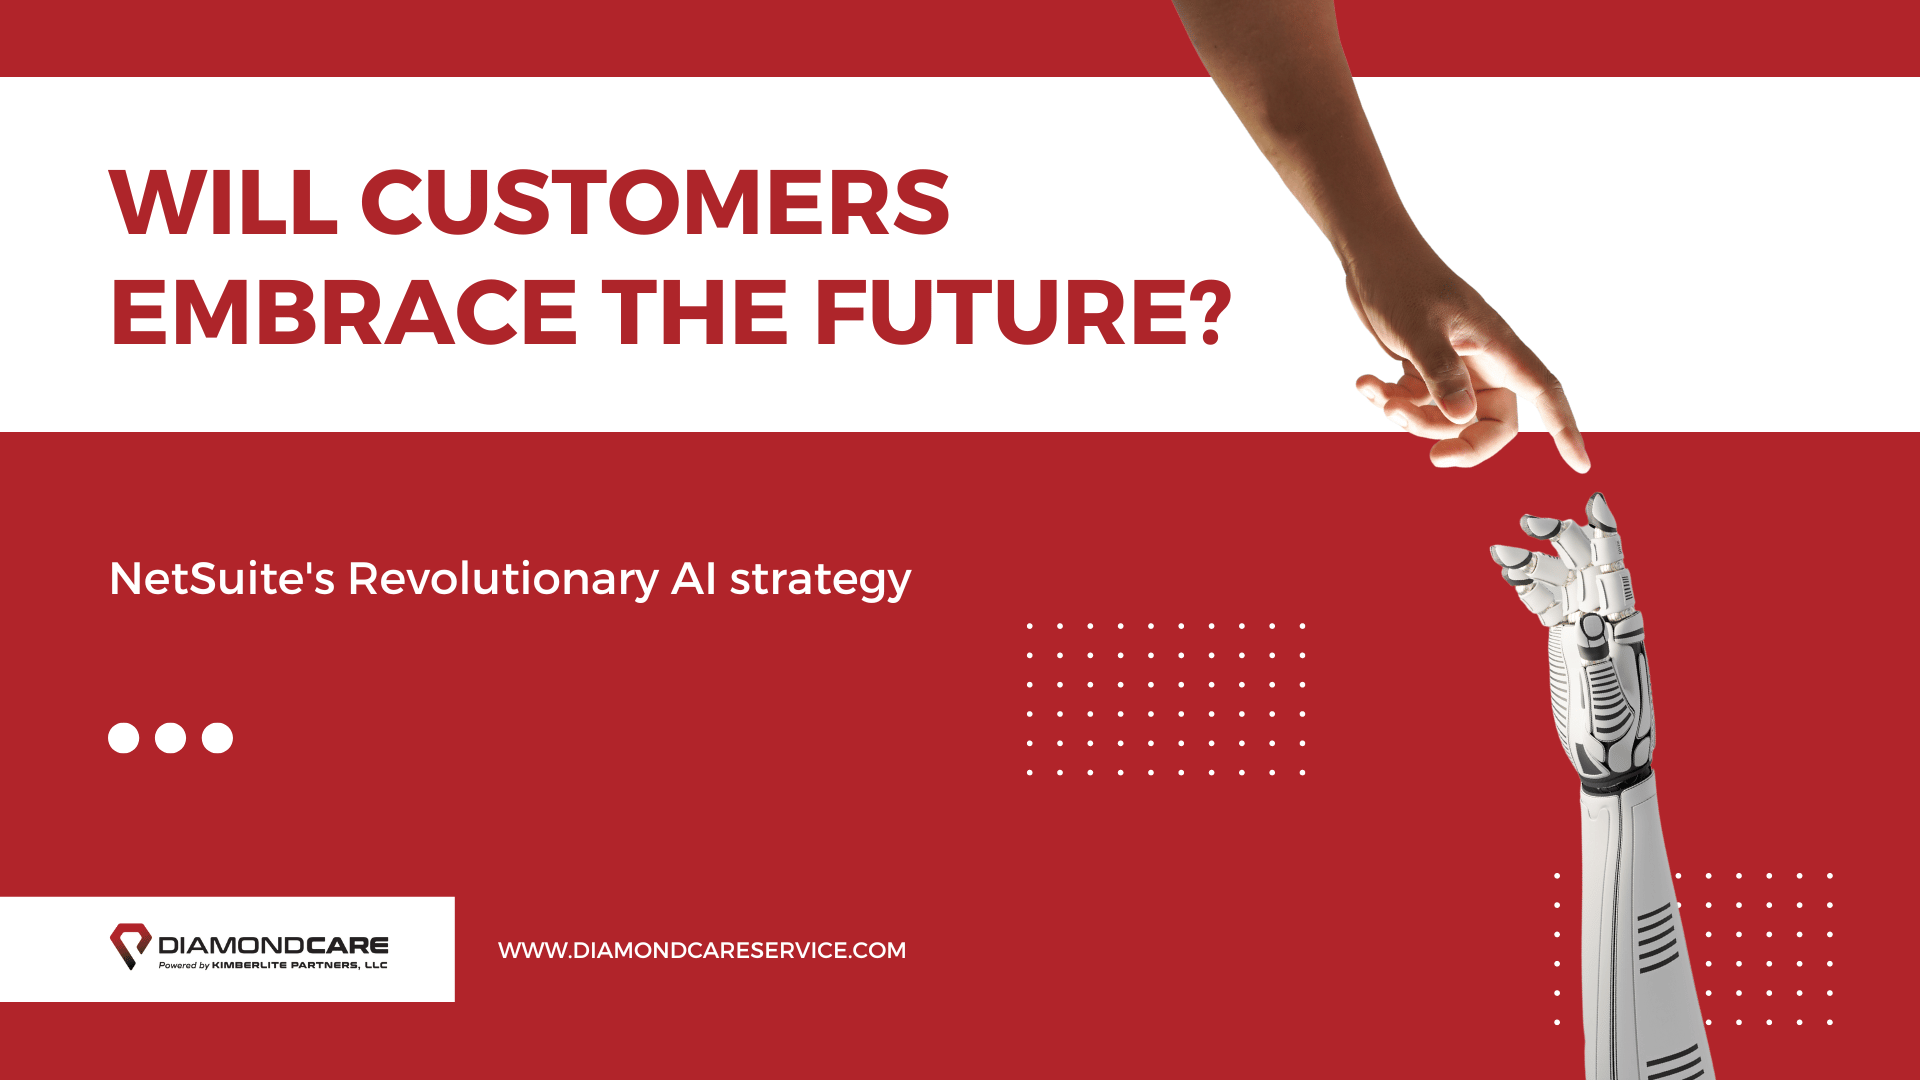 NetSuite's Revolutionary AI Strategy: Will Customers Embrace the Future?